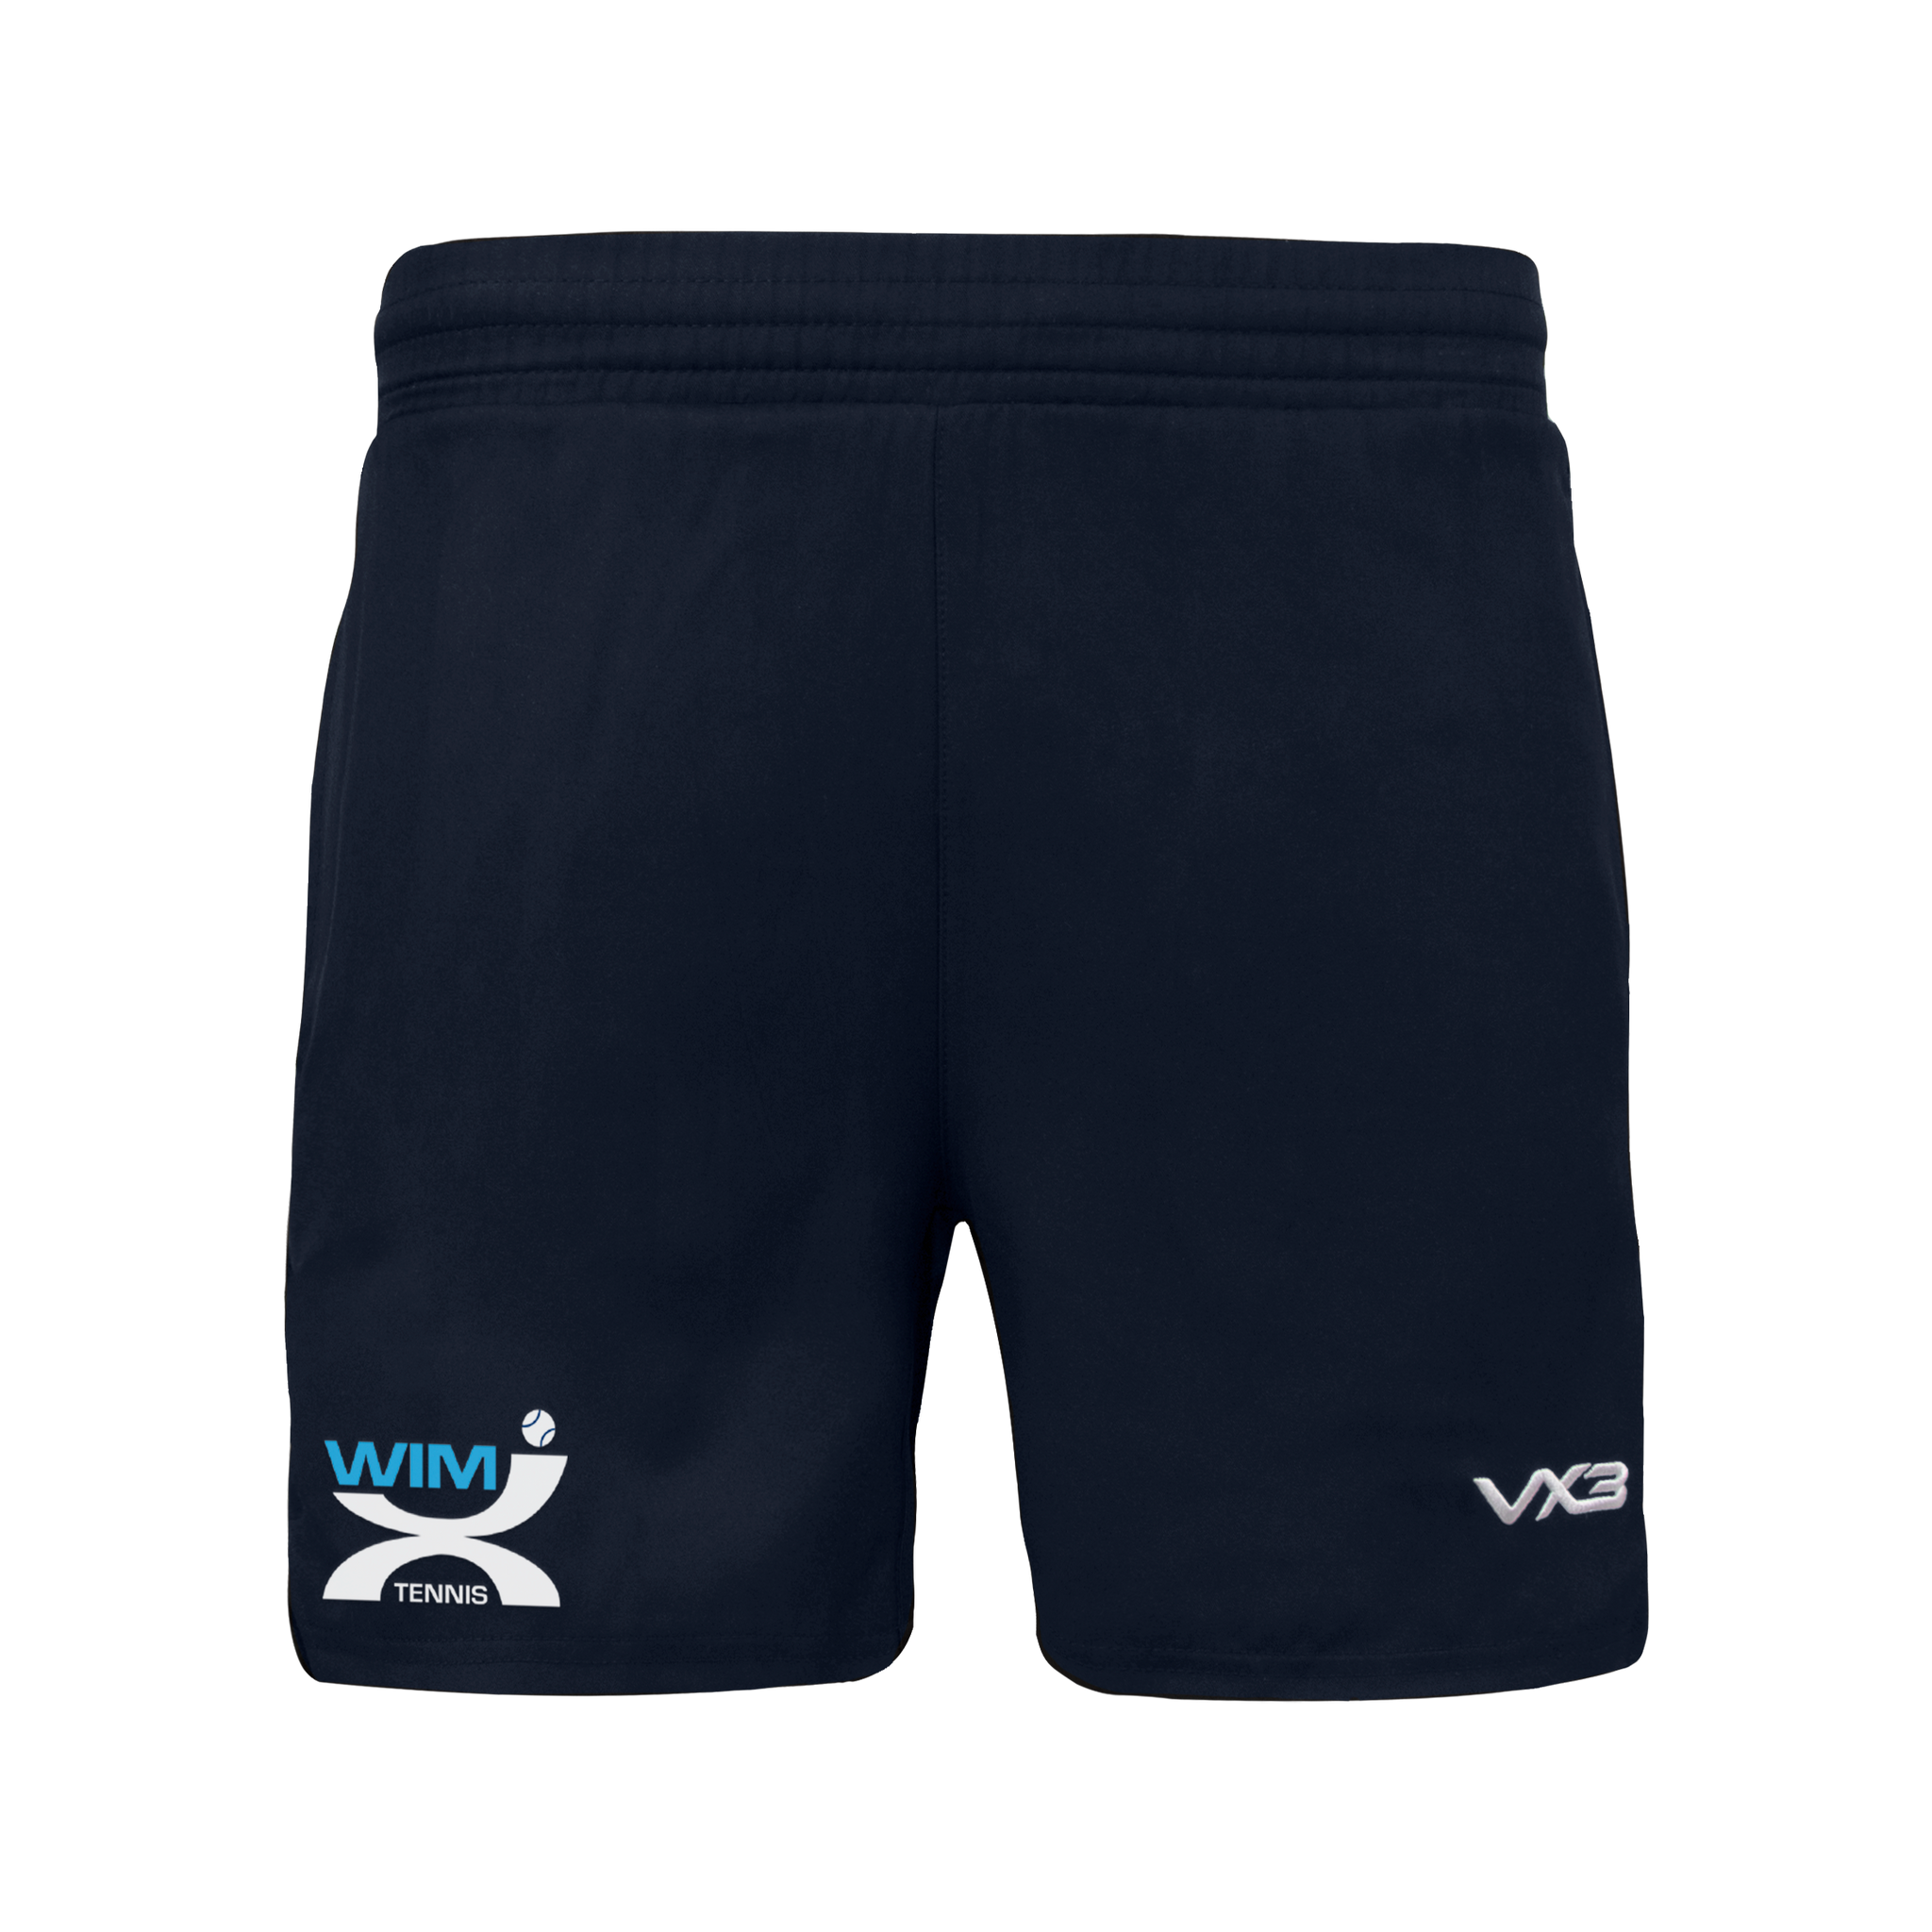 Wimx Tennis Ludus Youth Gym Short